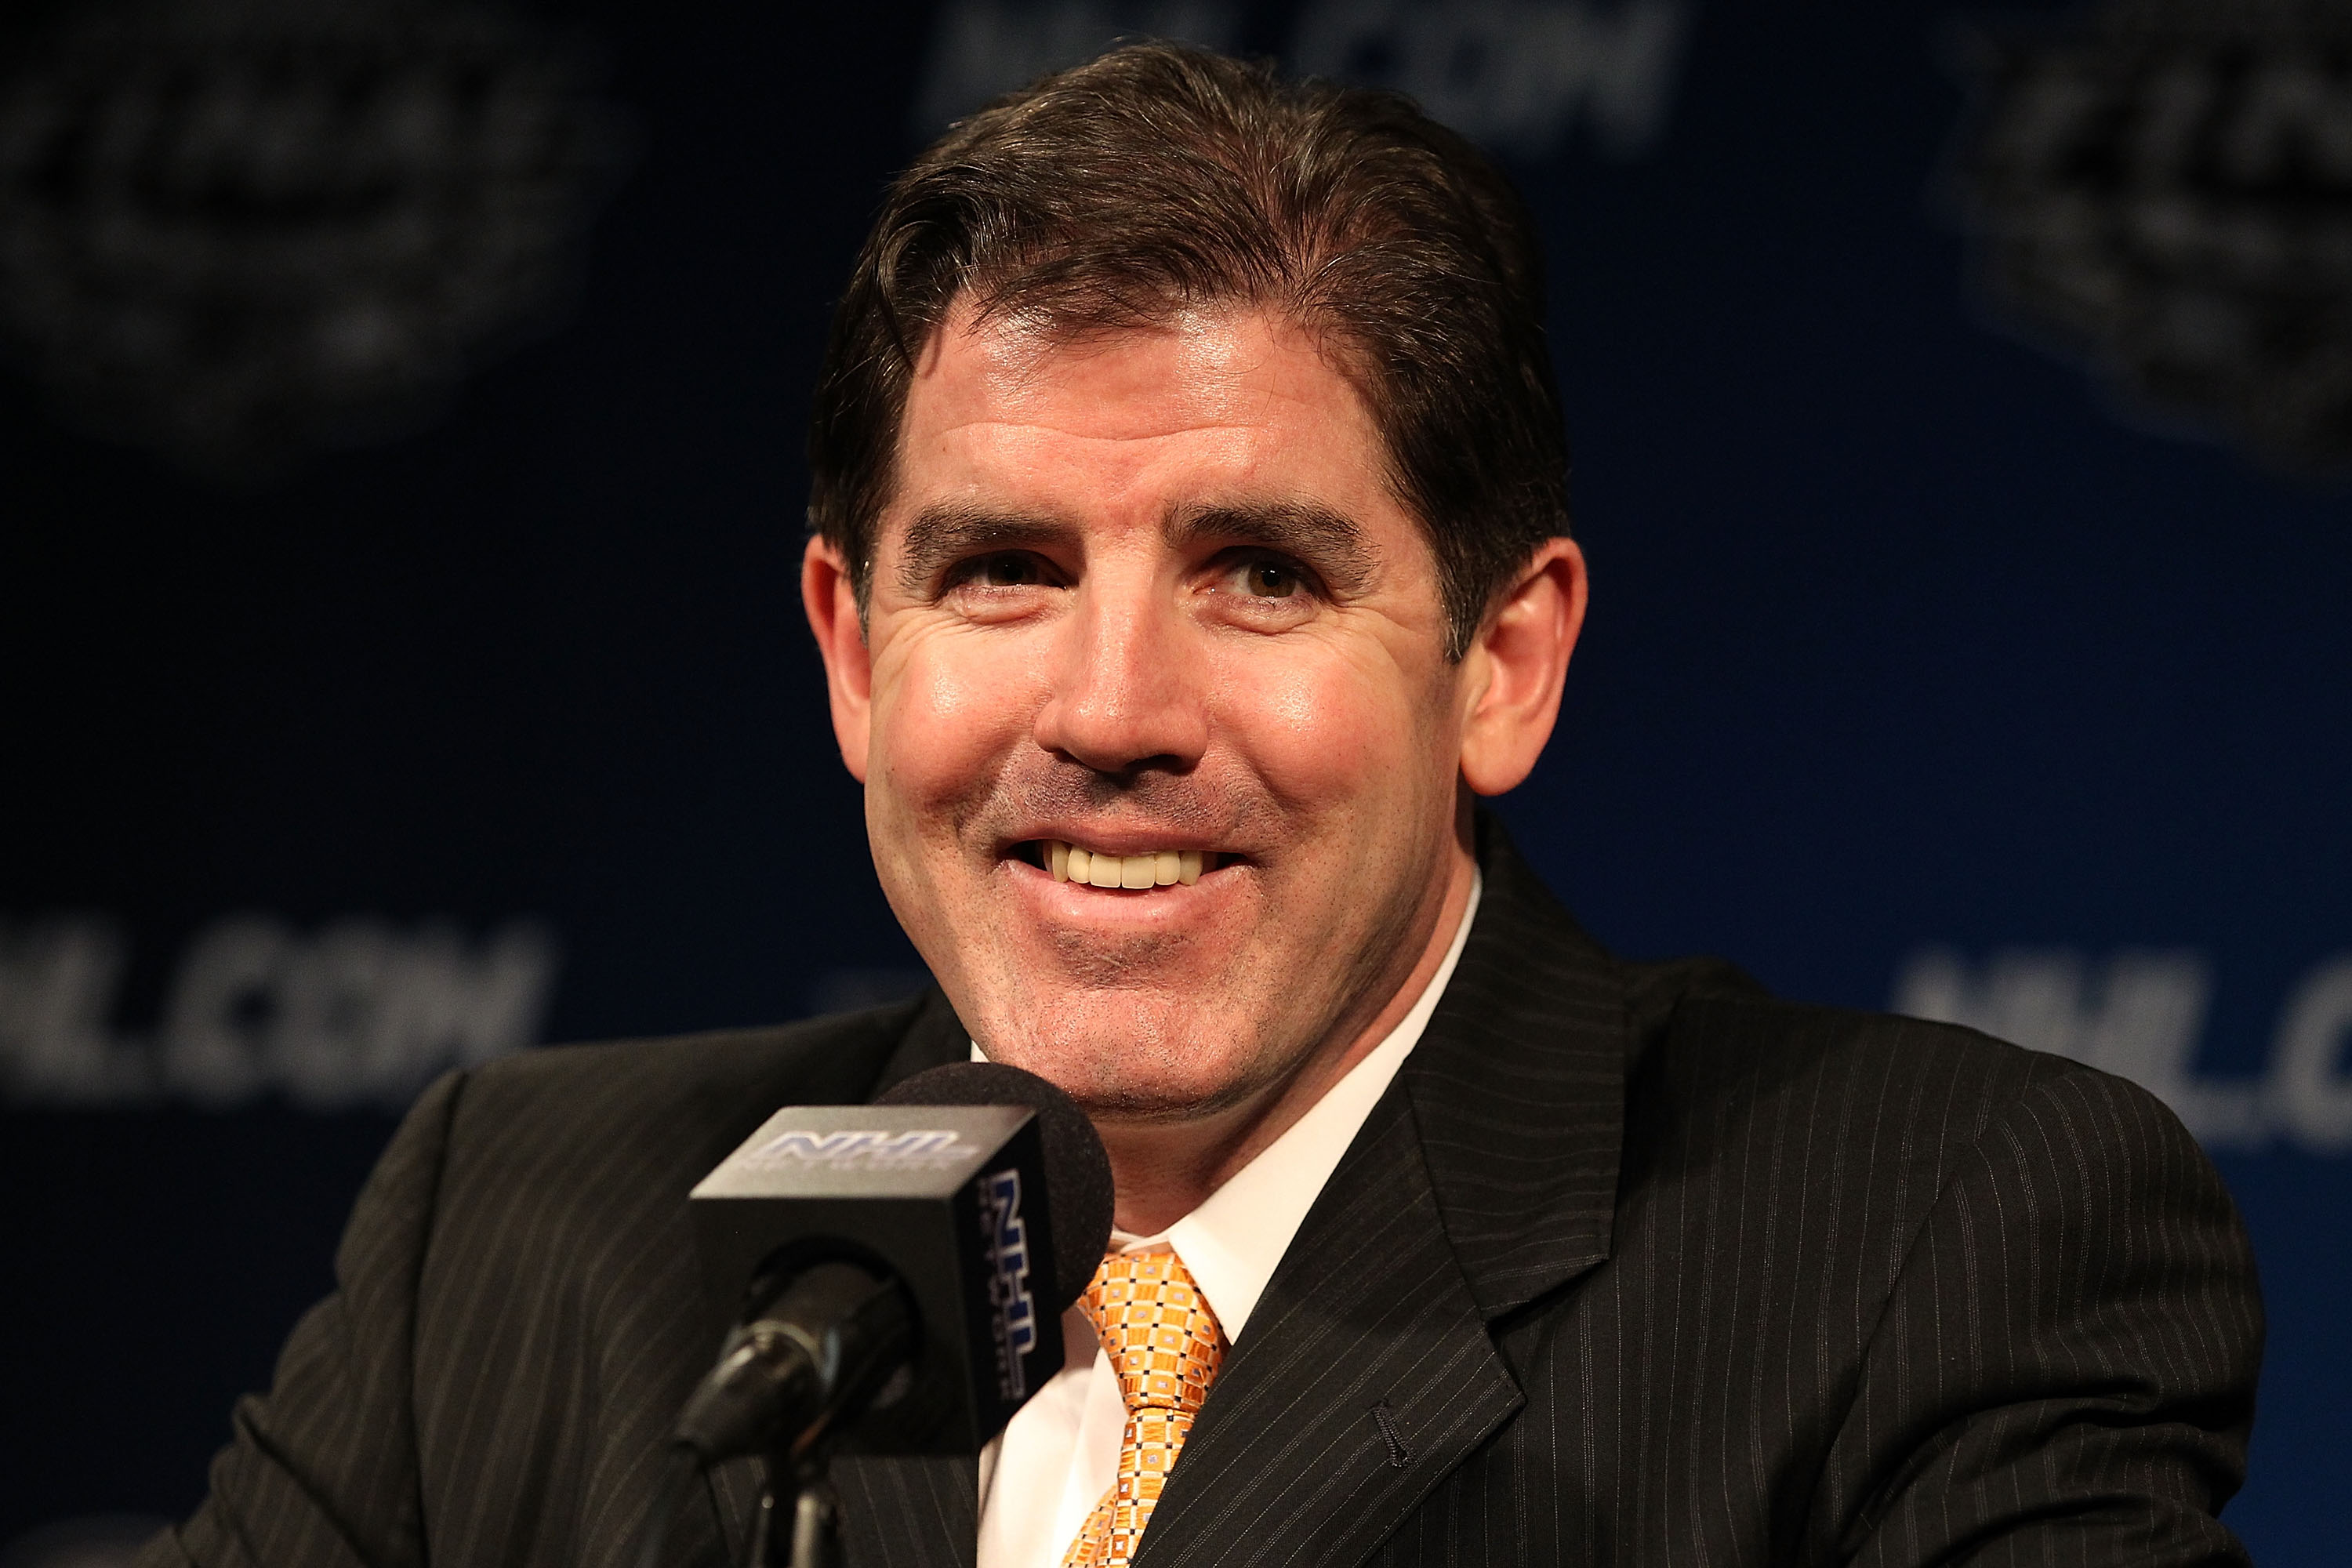 Peter Laviolette’s Salary 5 Fast Facts You Need to Know